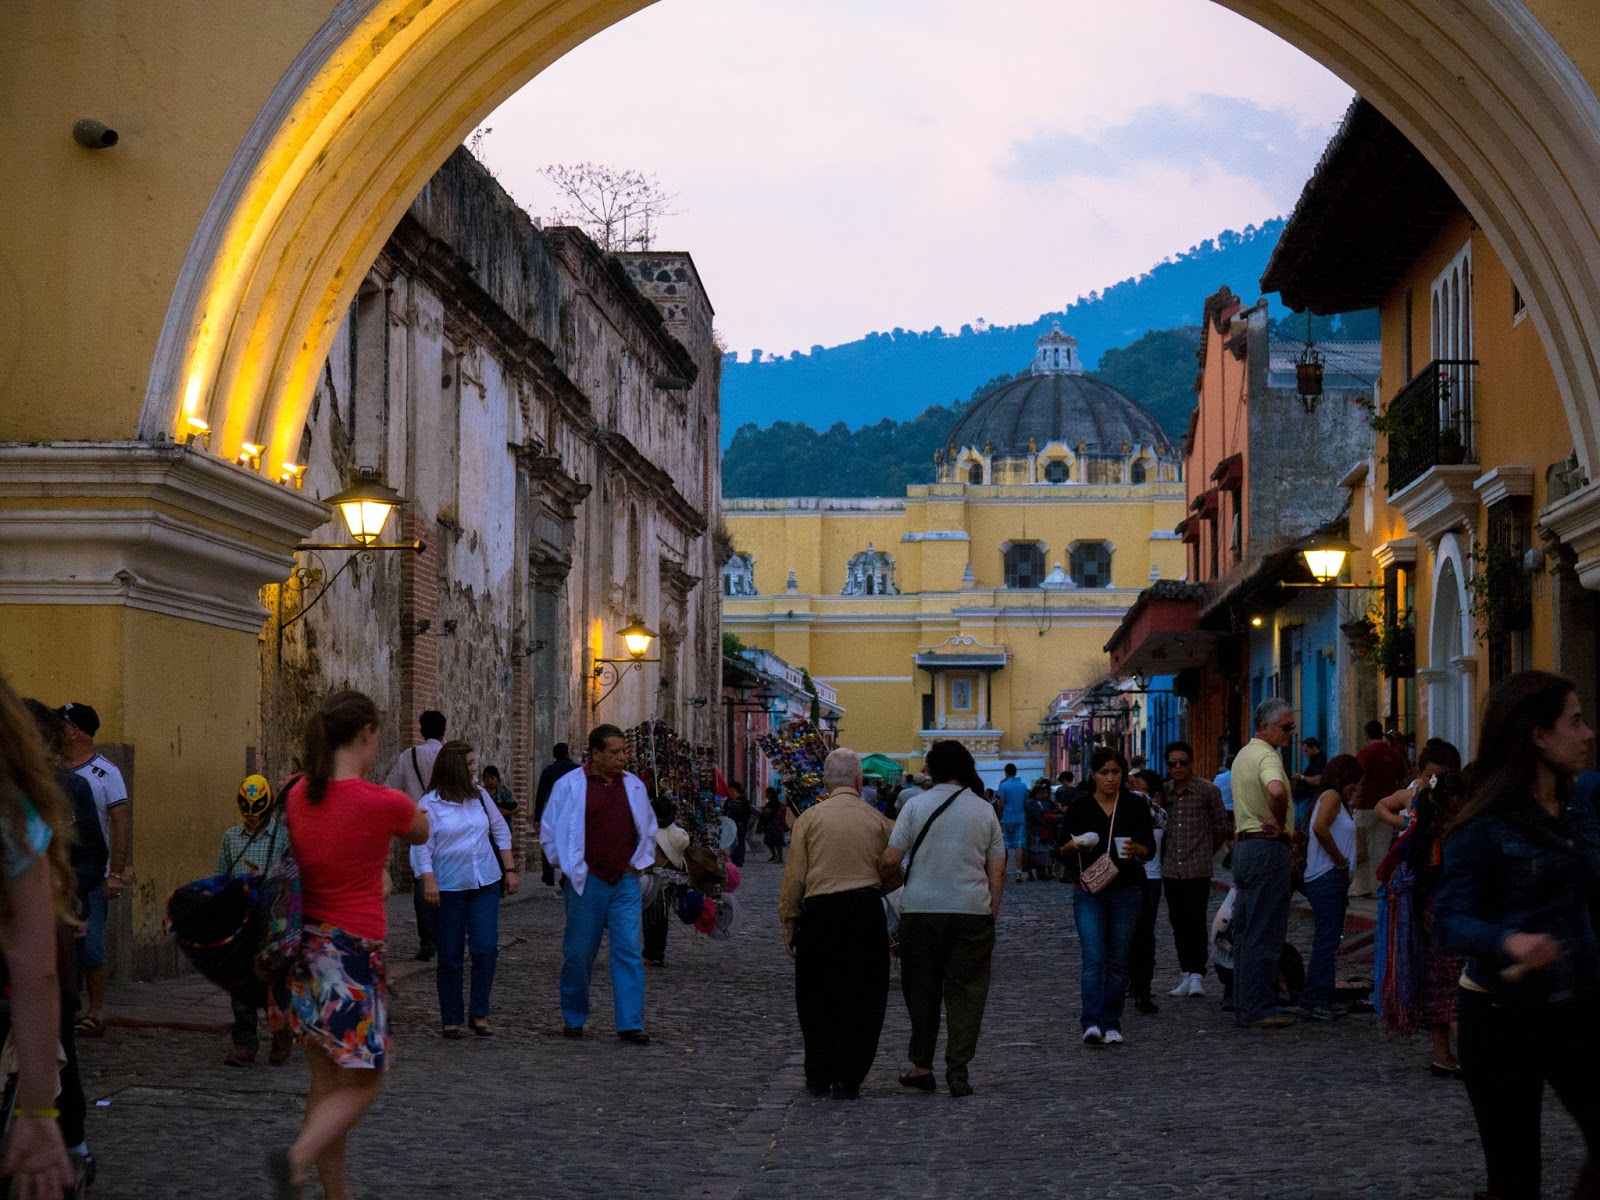 Antigua Guatemala Pictures during holy week